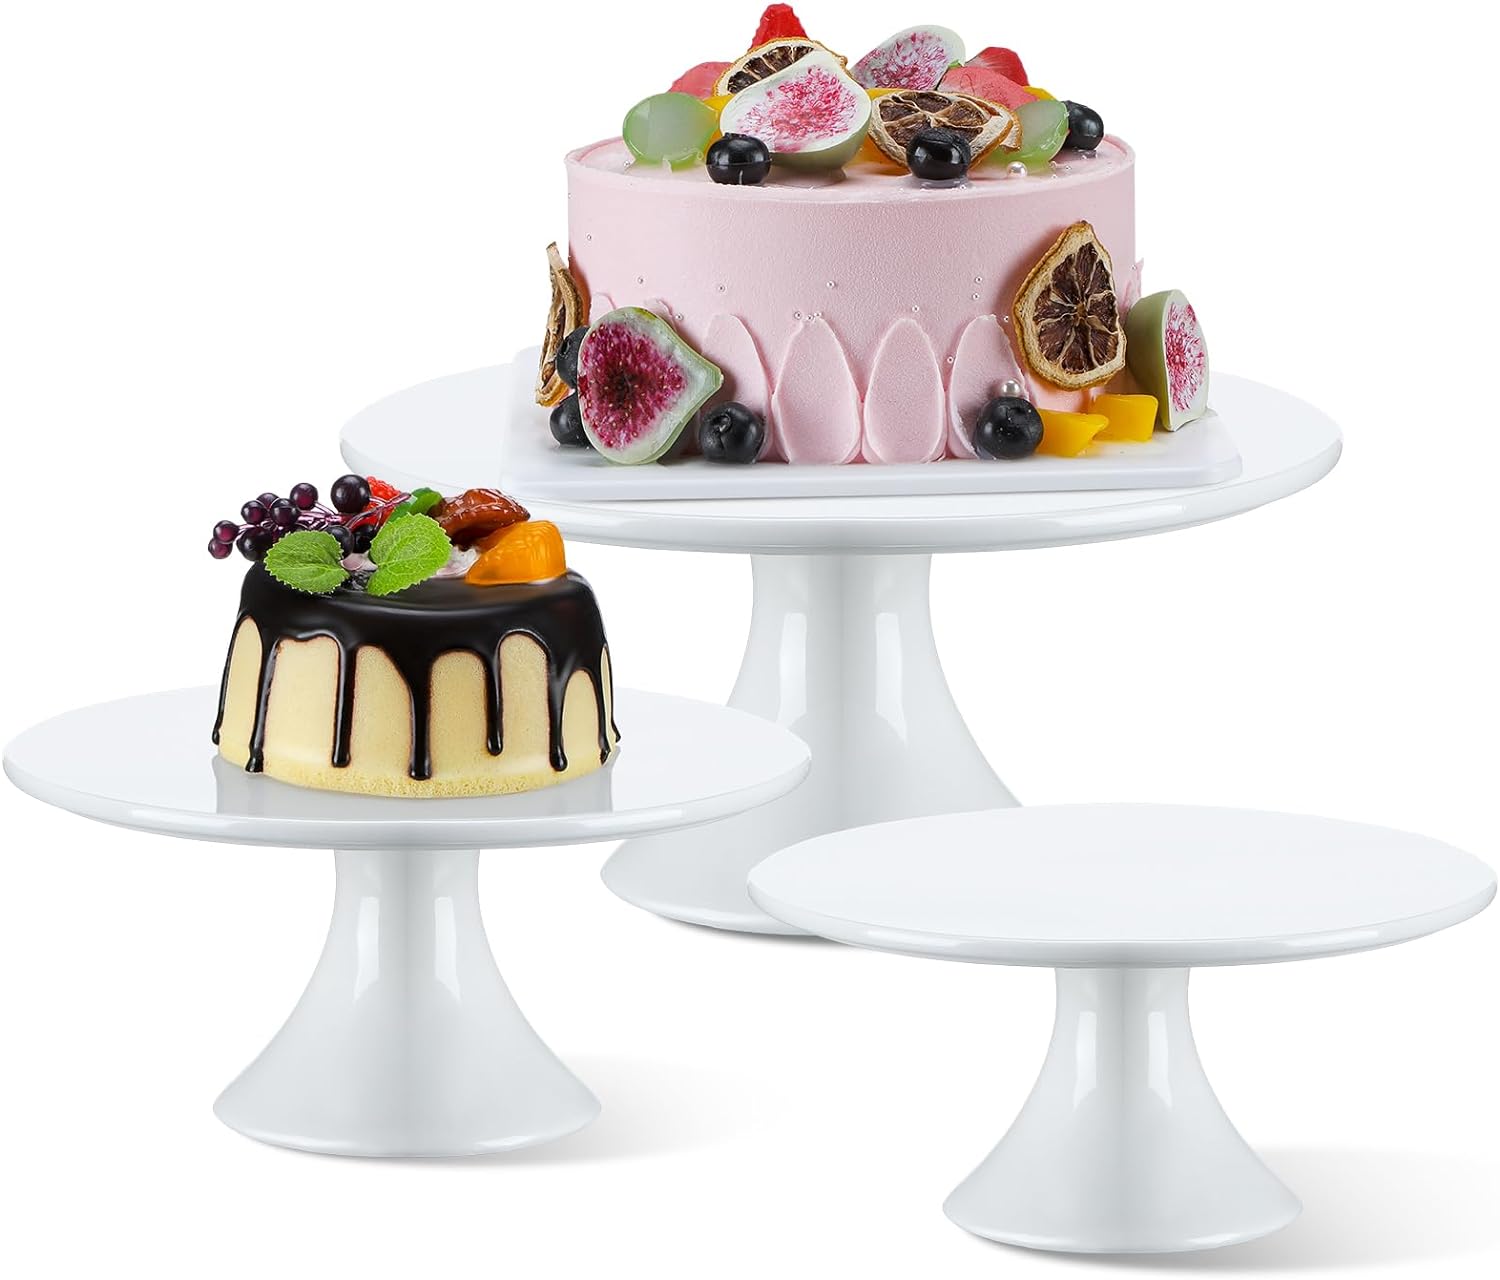 Umigy 3 Pcs Porcelain Round Cake Stand Round Dessert Stand Ceramic White Cupcake Stand Pedestal Cake Plate Dessert Display Stands for Wedding Serving Table Parties Decorating Birthday, 7.9 9.8 12